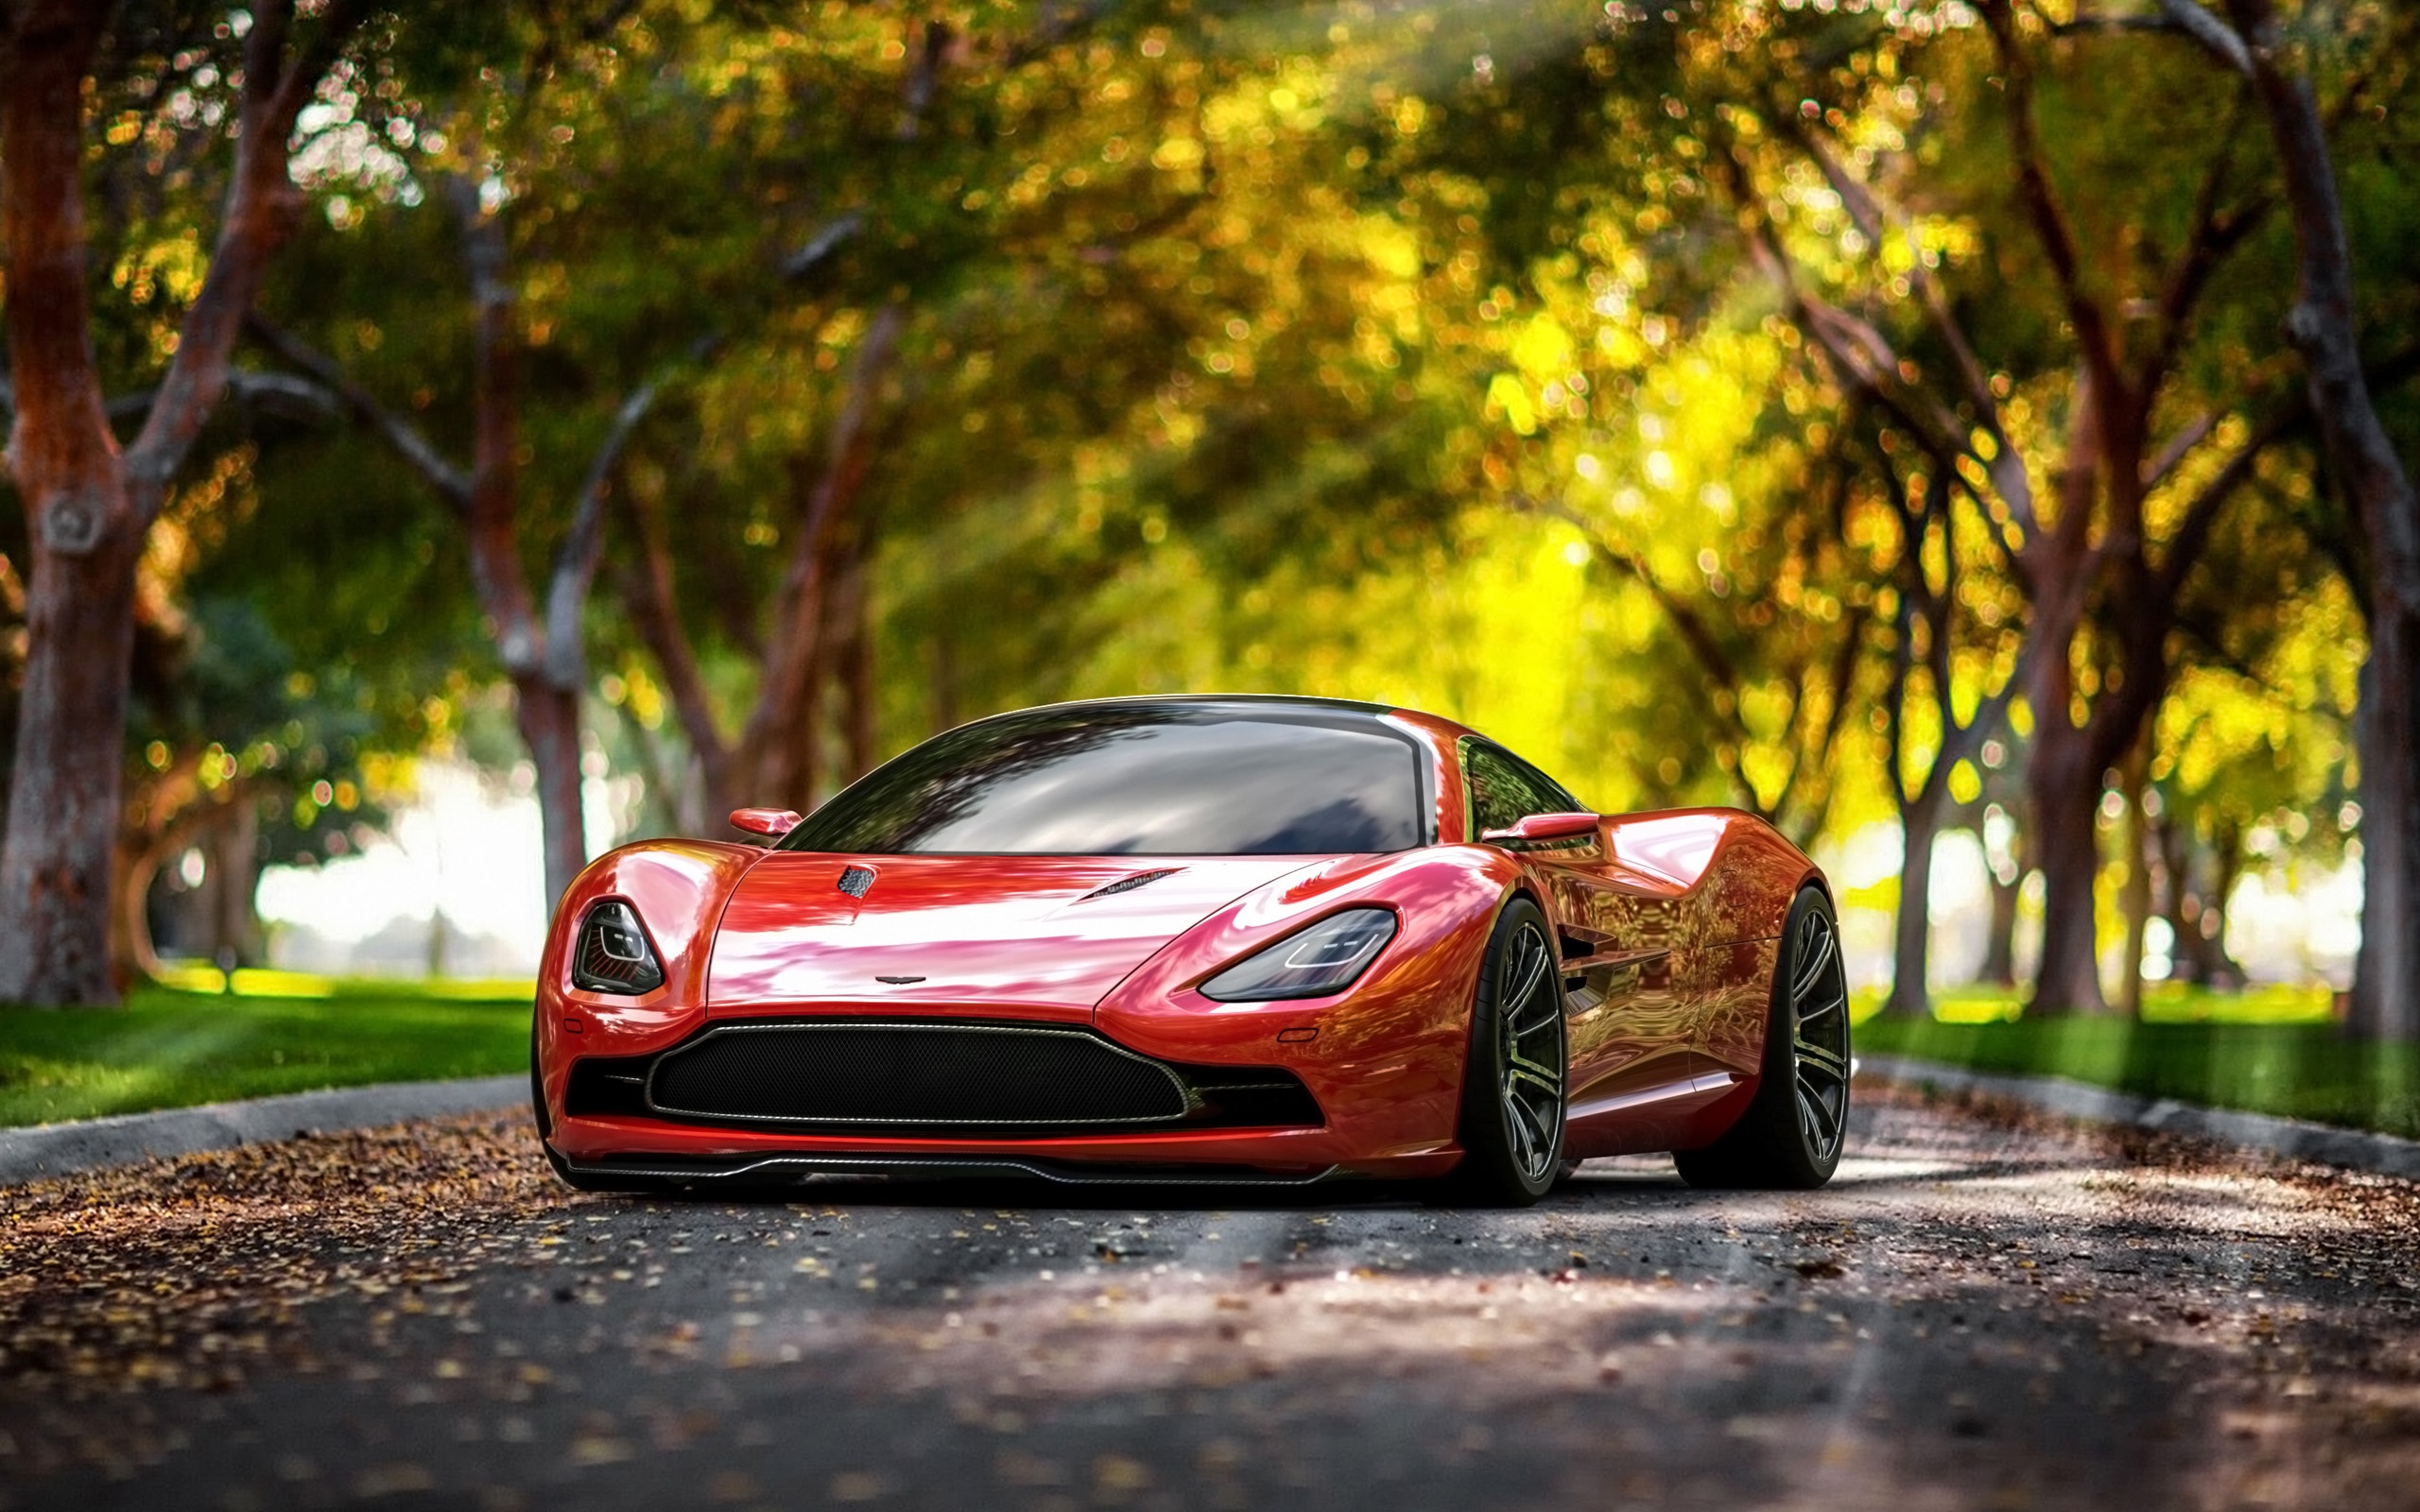 Red Sports Car Wallpaper download